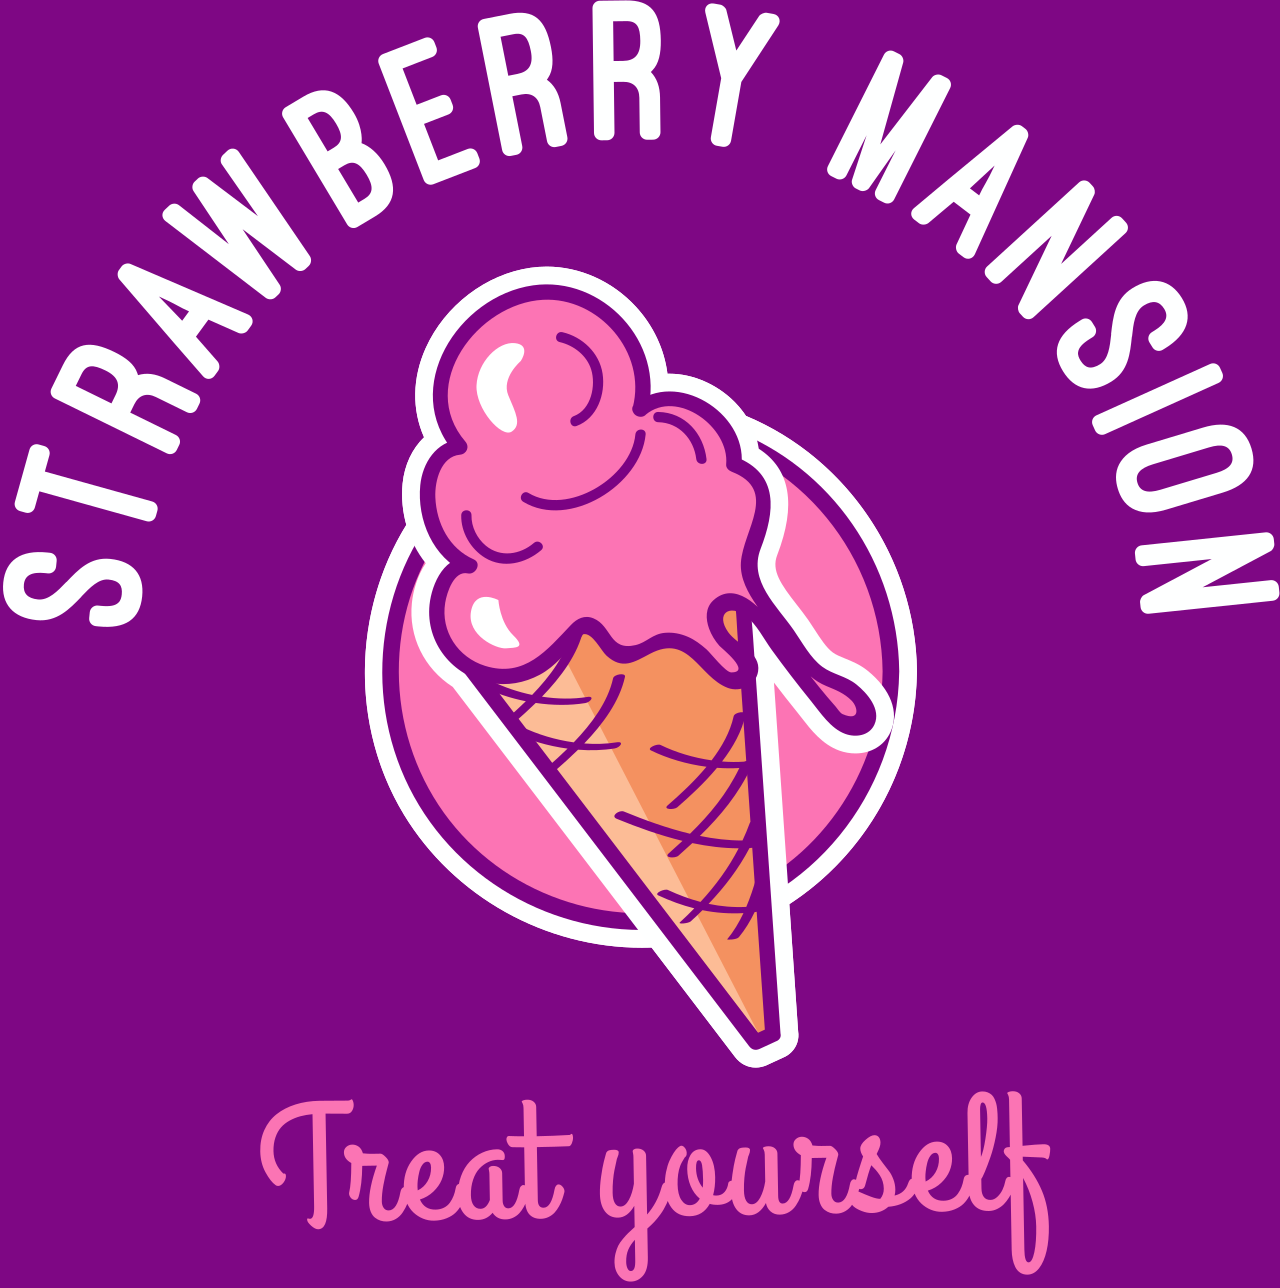  Strawberry Mansion 's web page